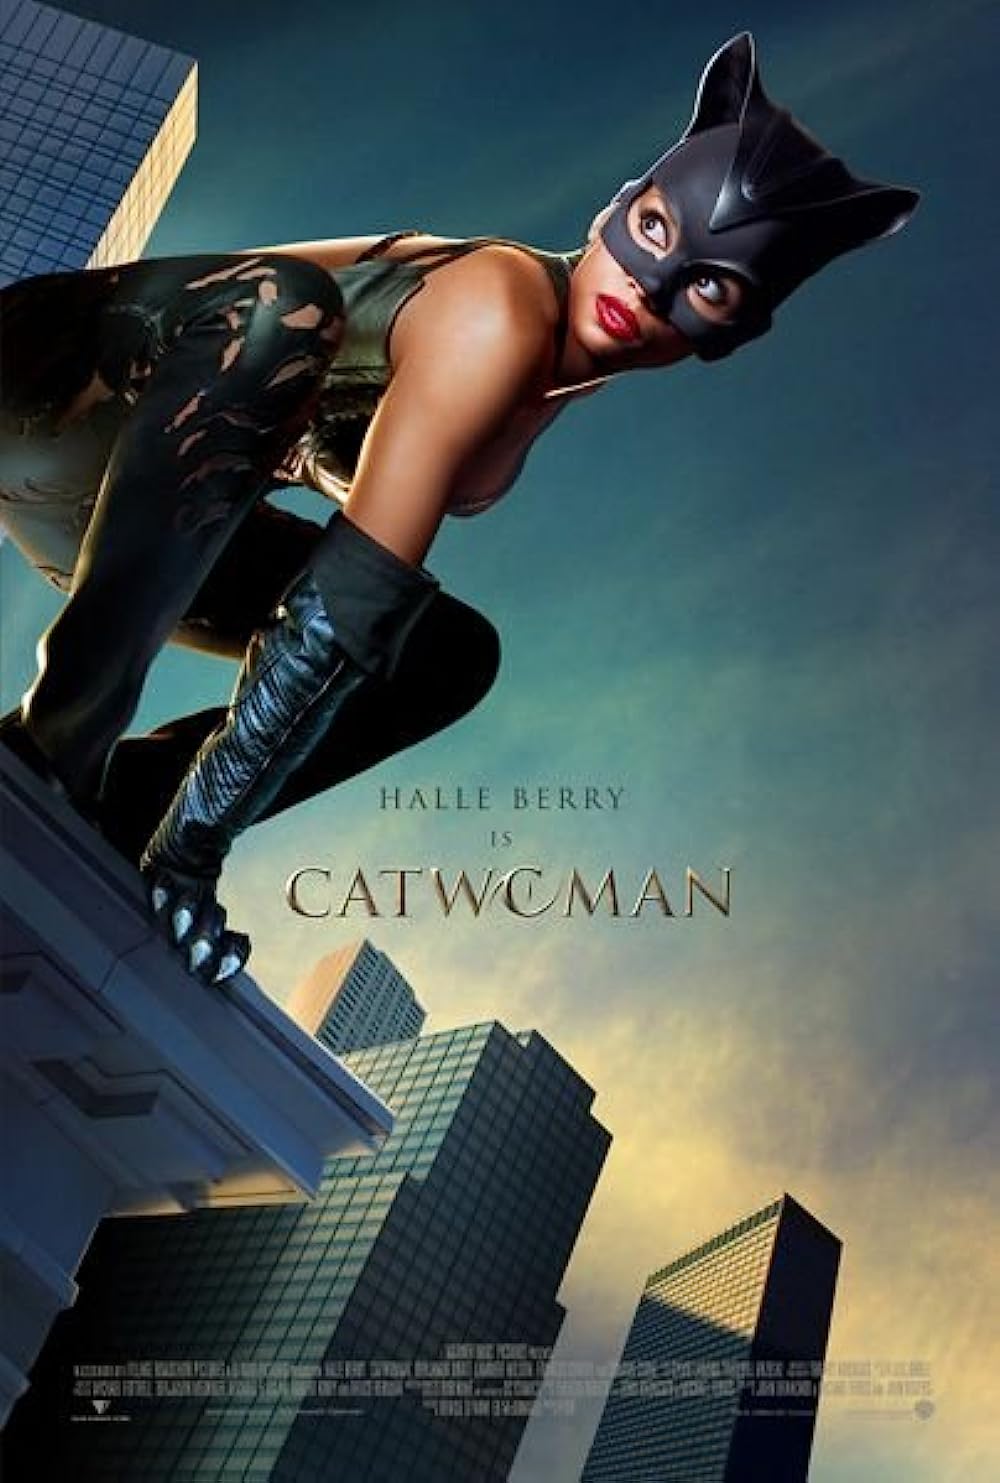 Catwoman - DC comics movies in order